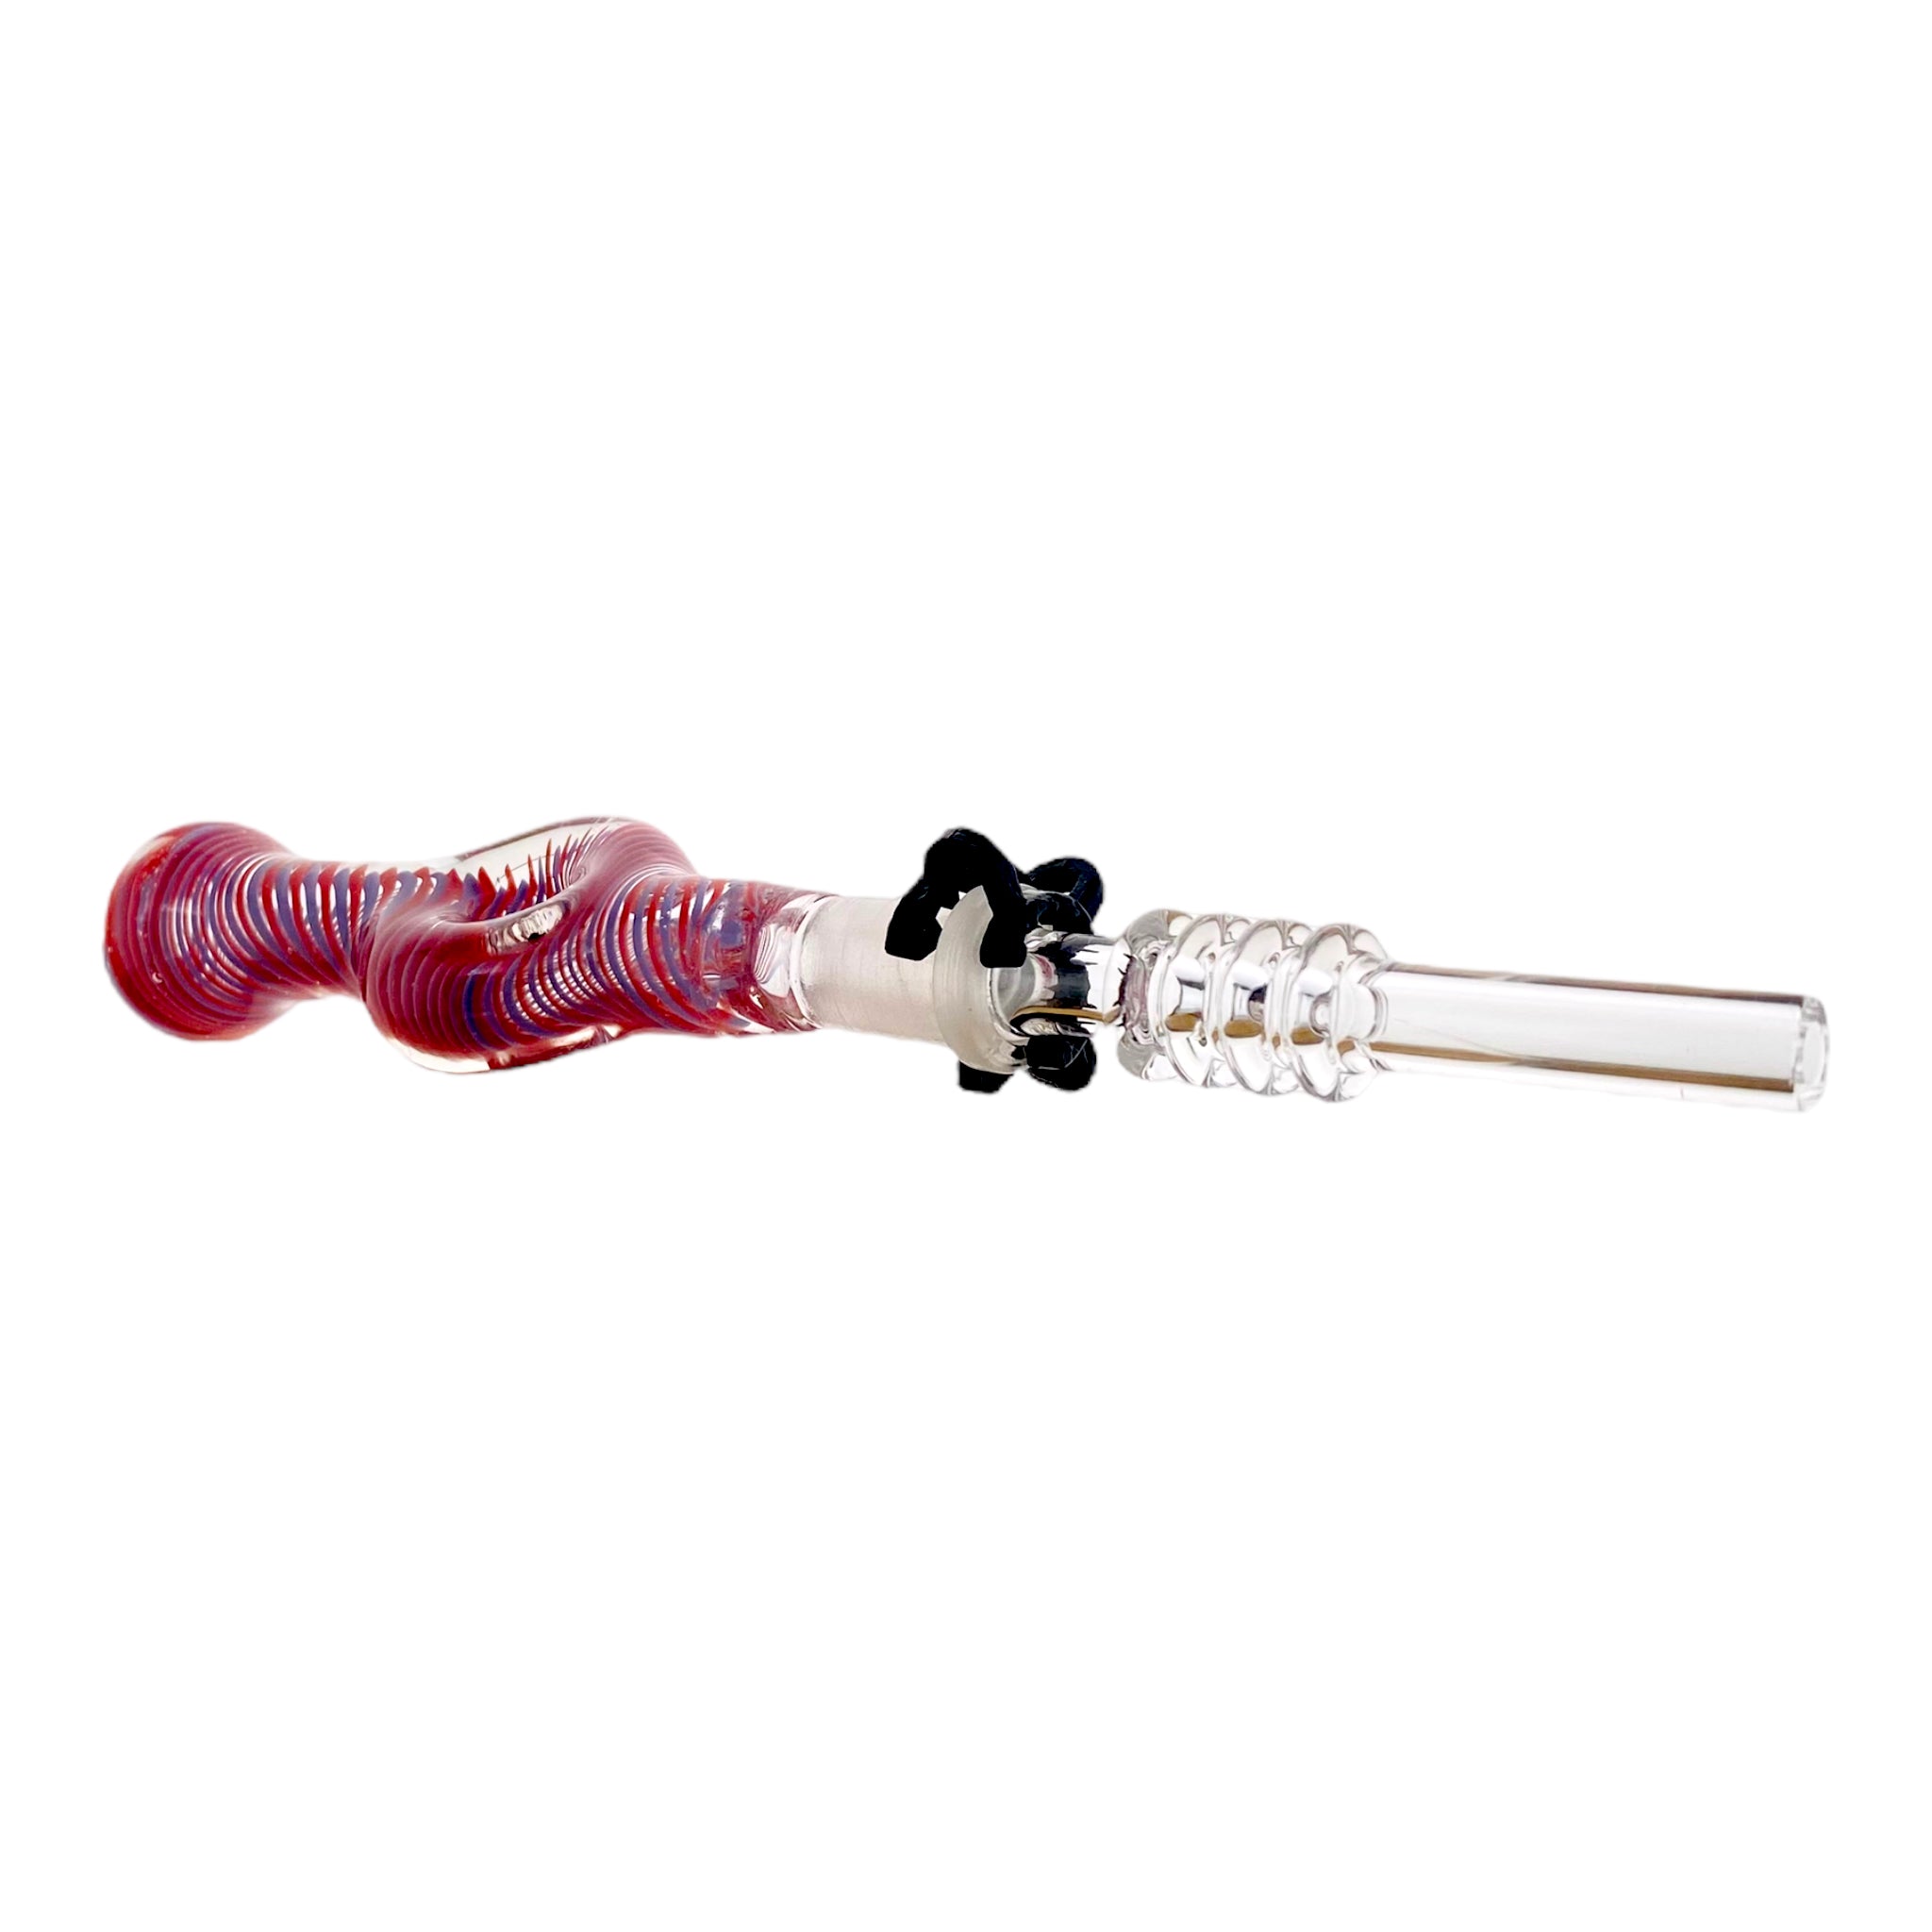 10mm Nectar Collector - Blue And Red Inside Out Spiral Donut With 10mm Quartz Tip